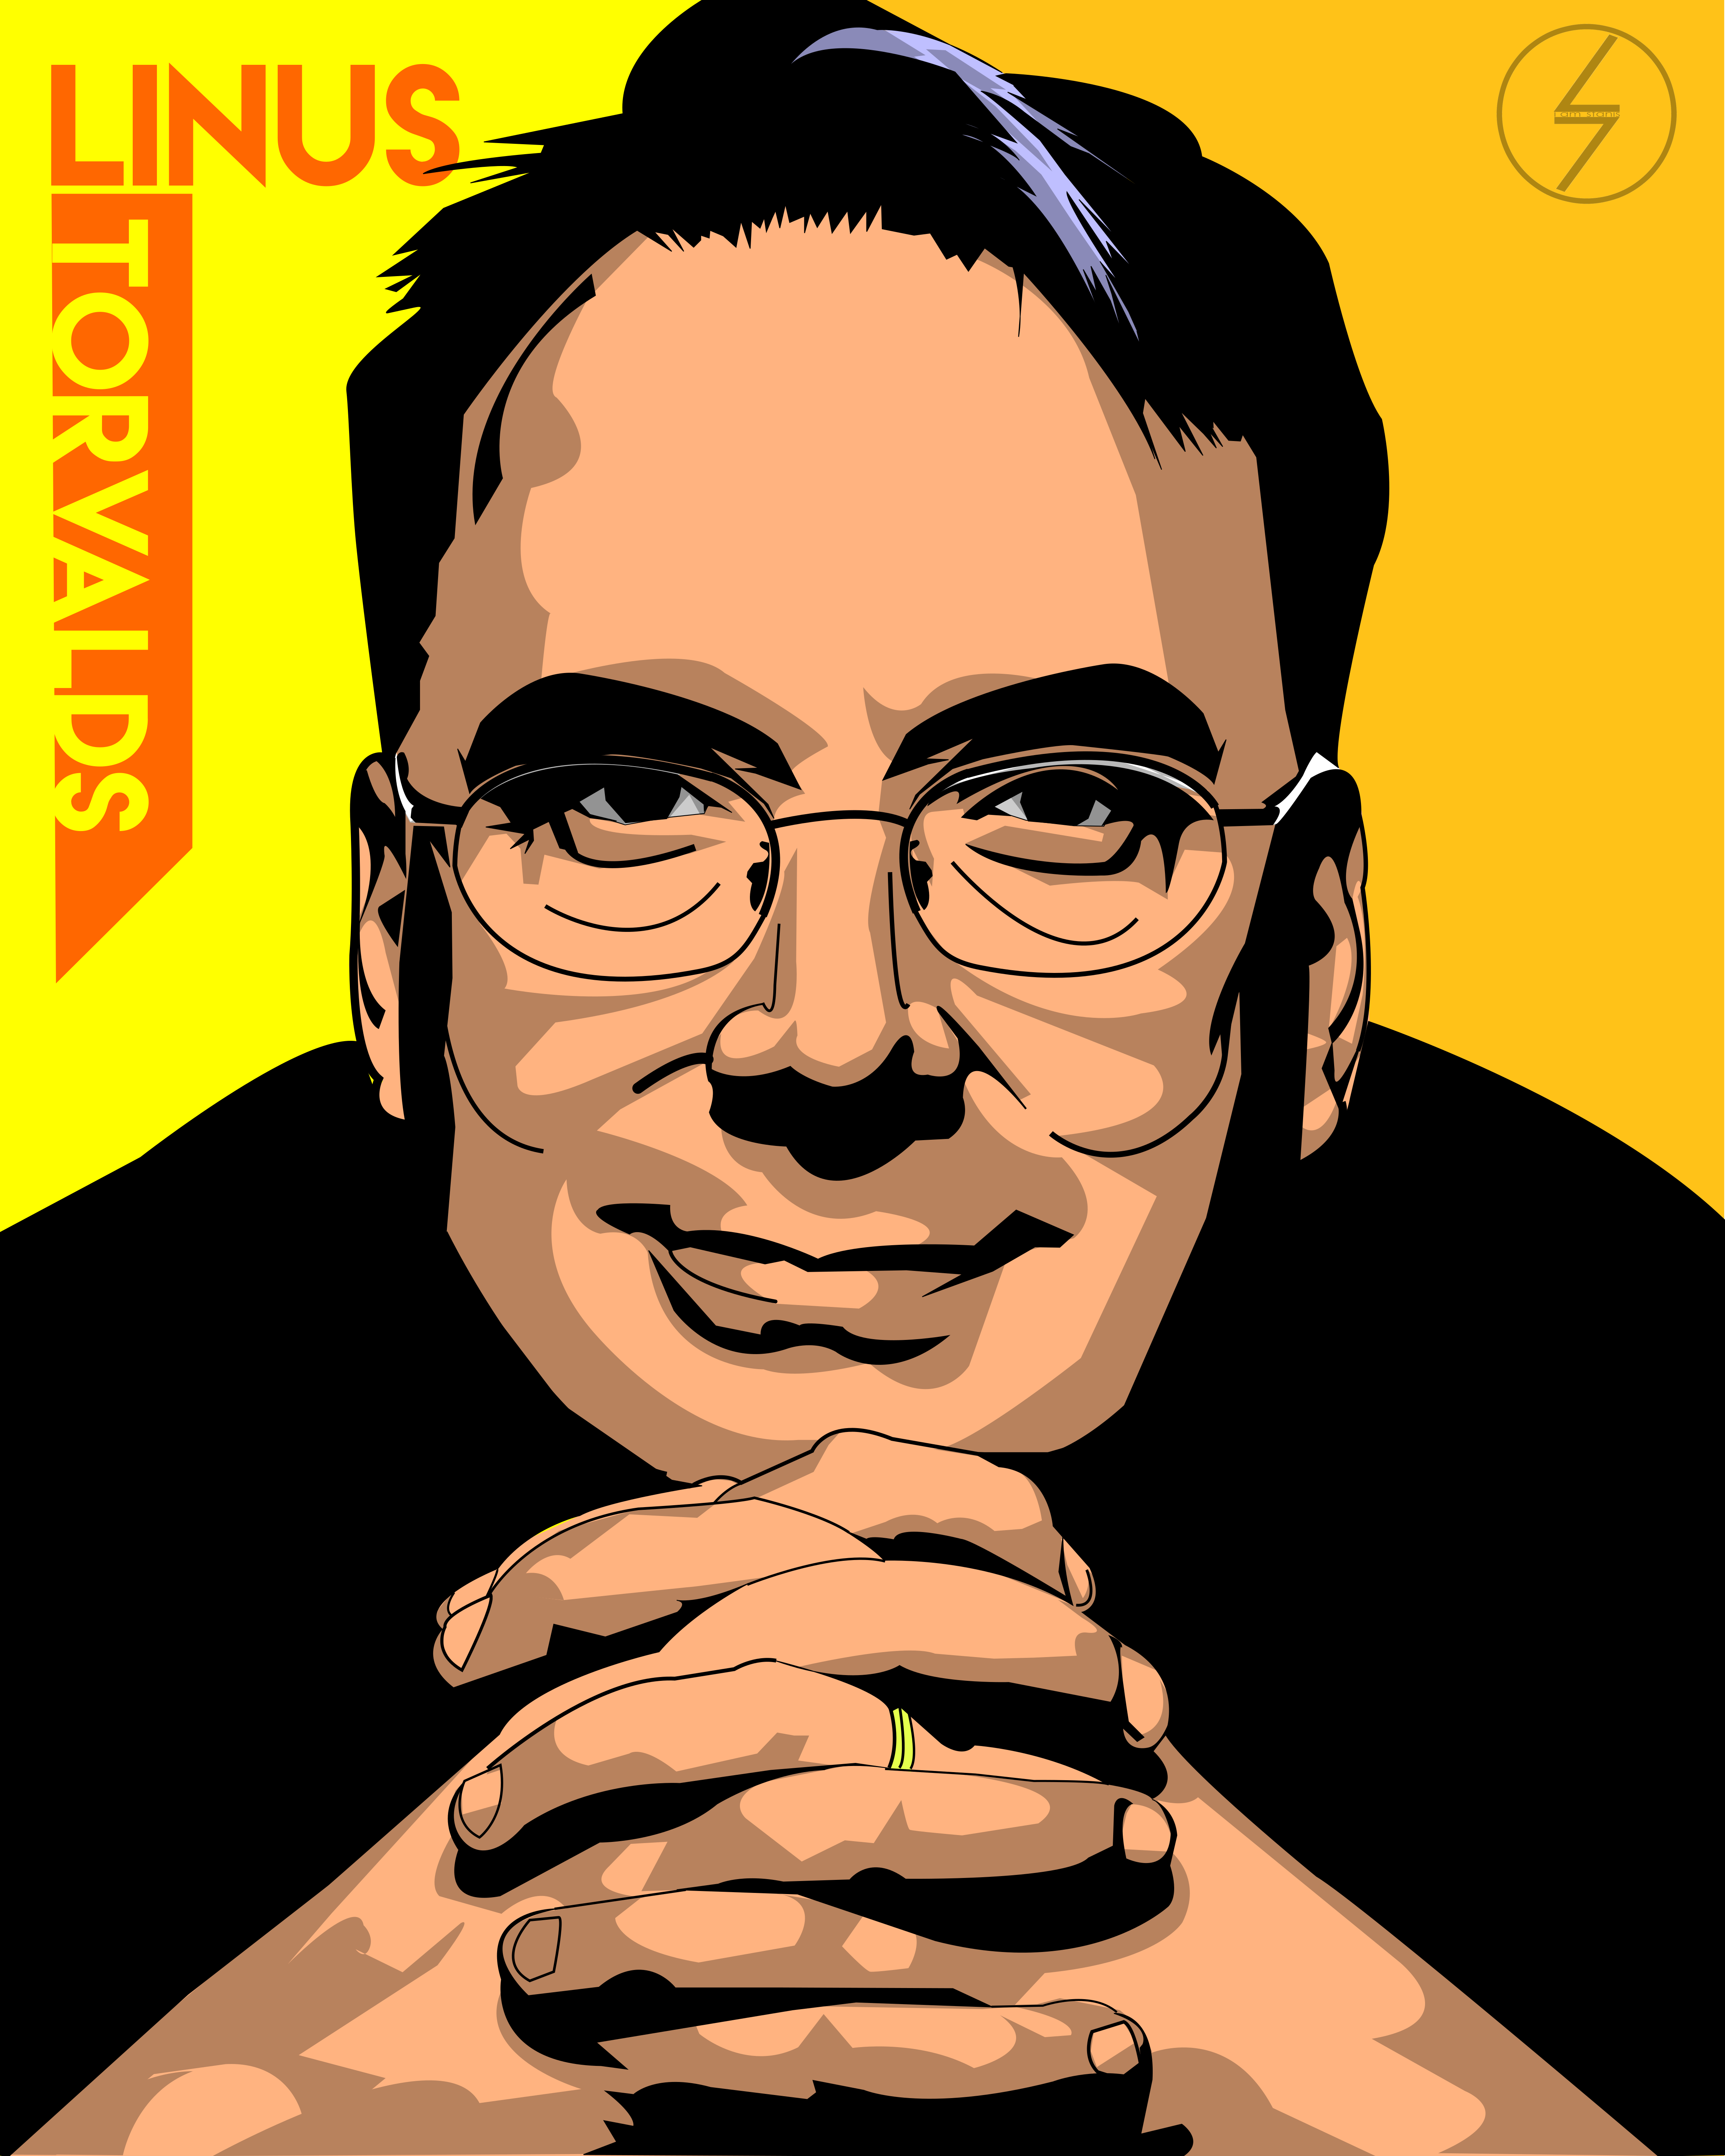 Linus Torvald in Comic Style